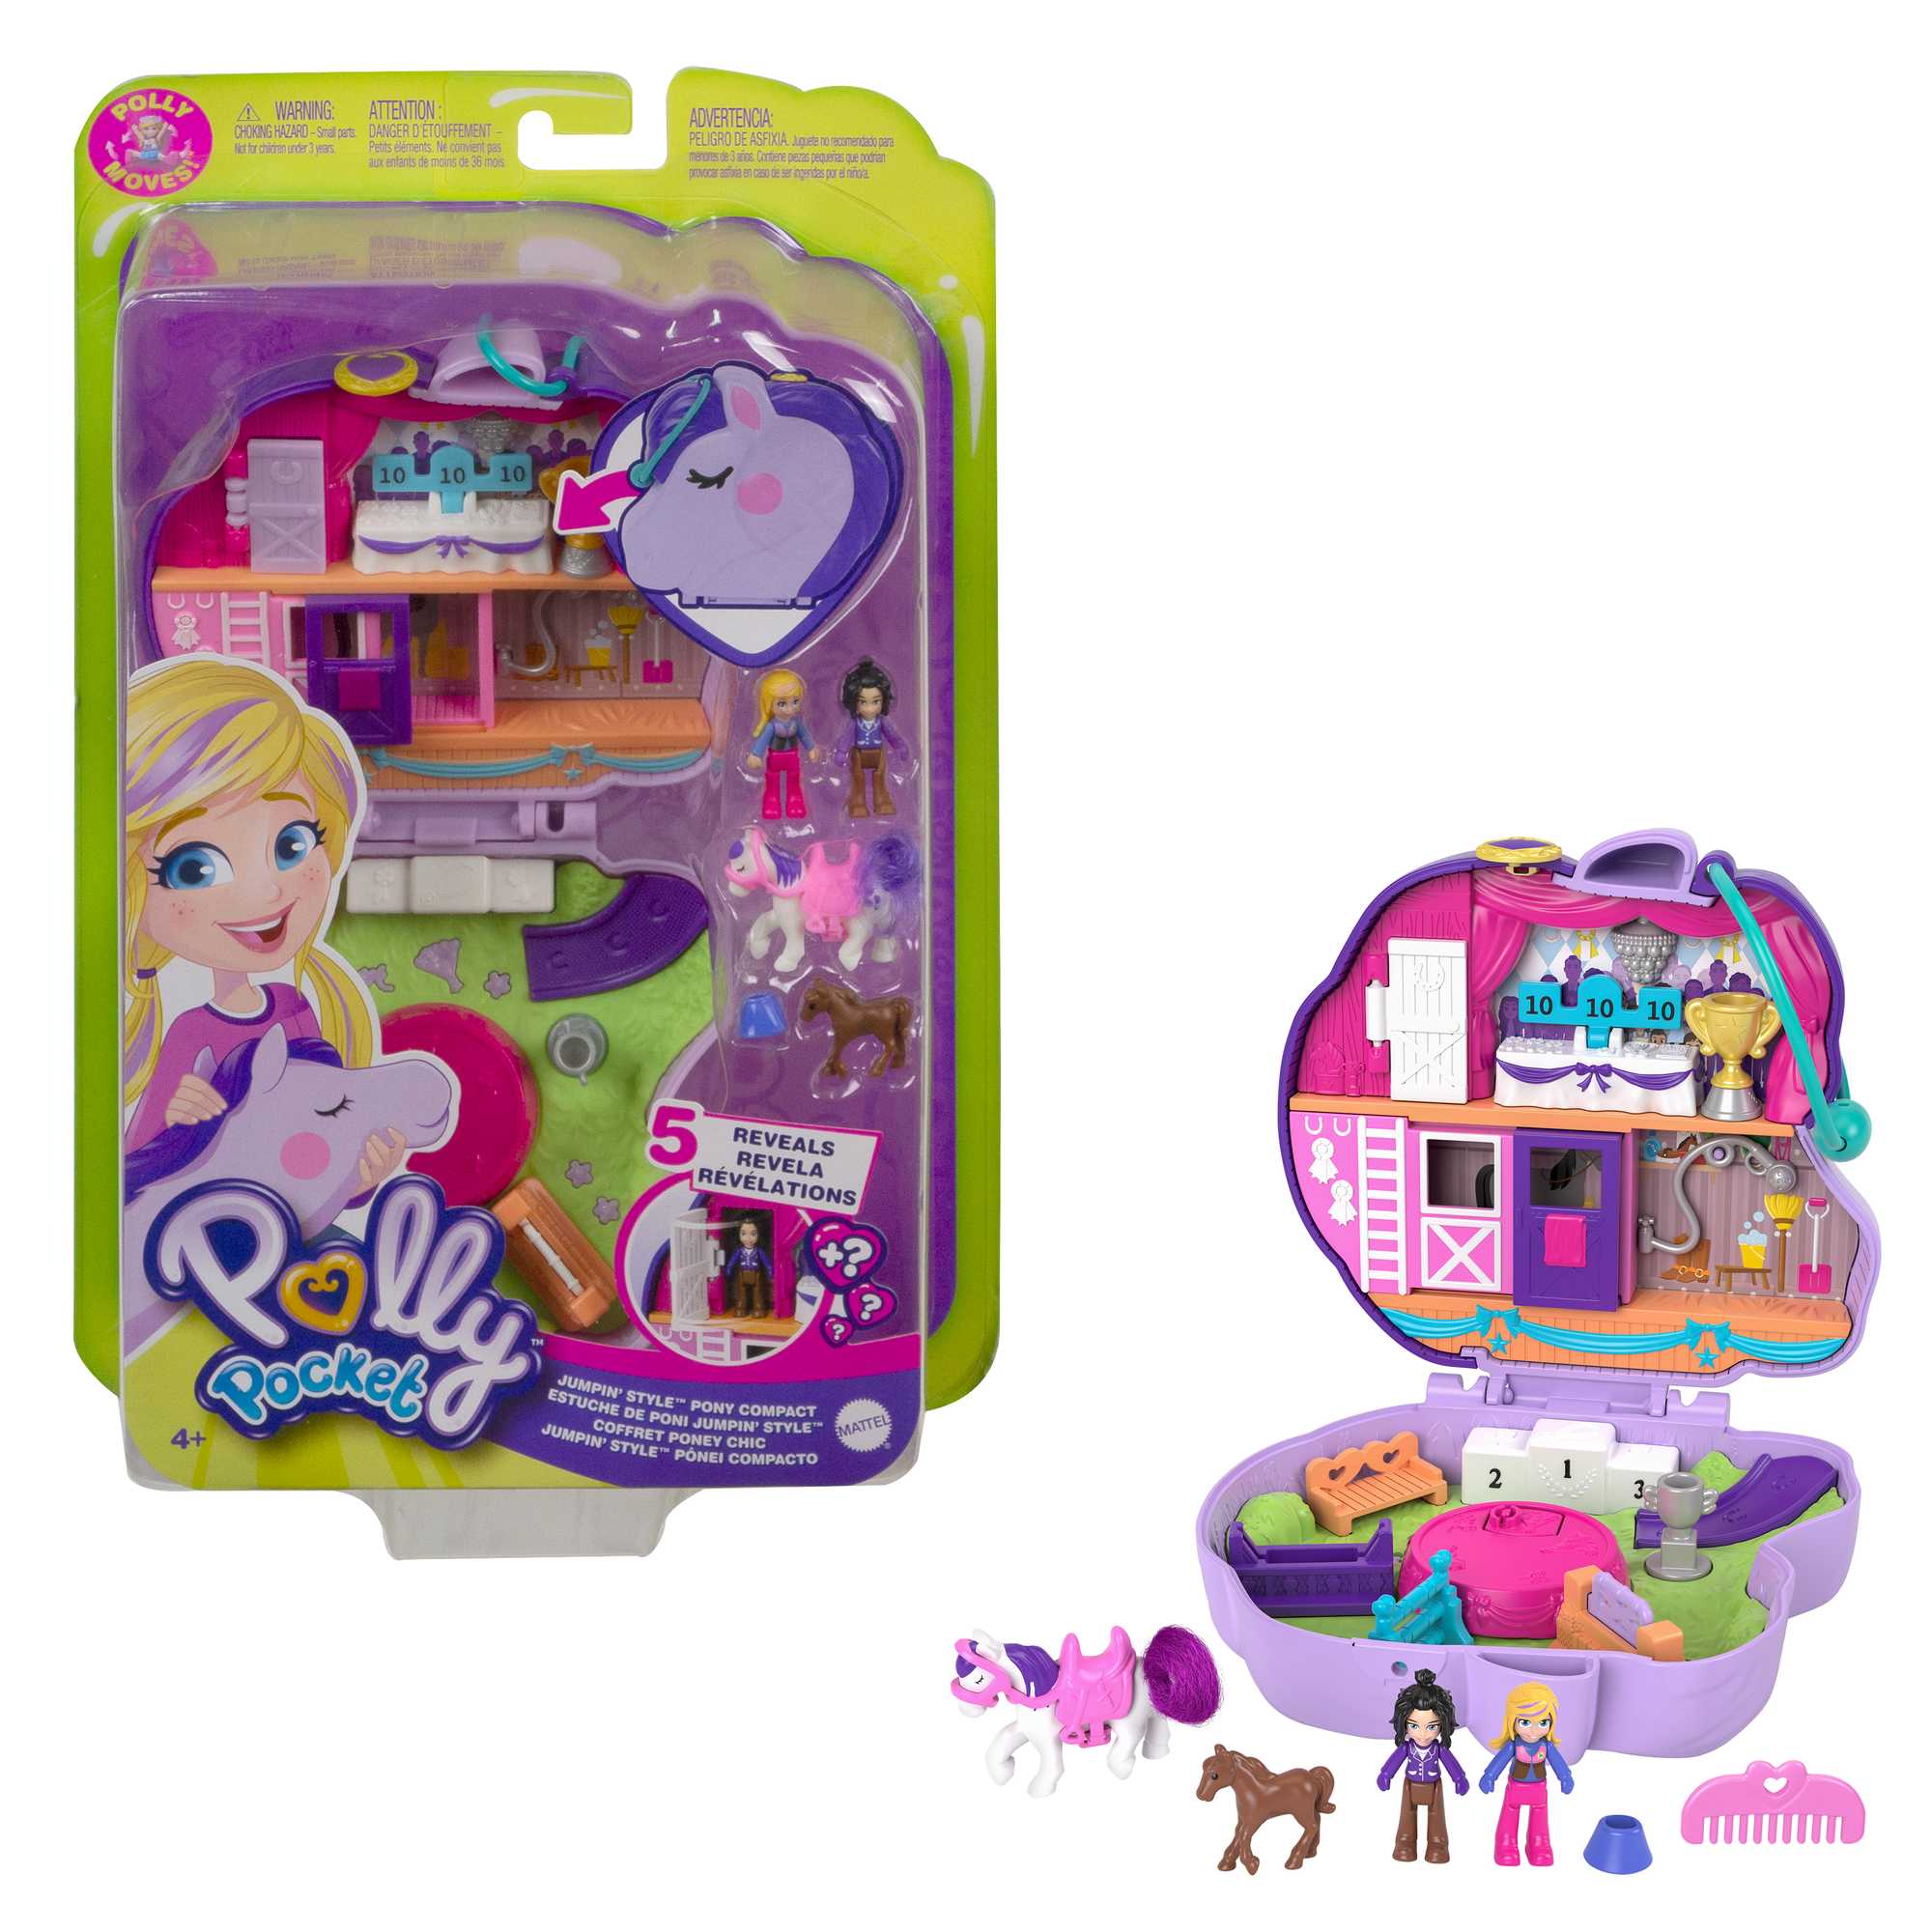 Toy Horses,Horse Stable PlaySet,Horse Toys for Girls 6 8 10 12,Farm horse  club